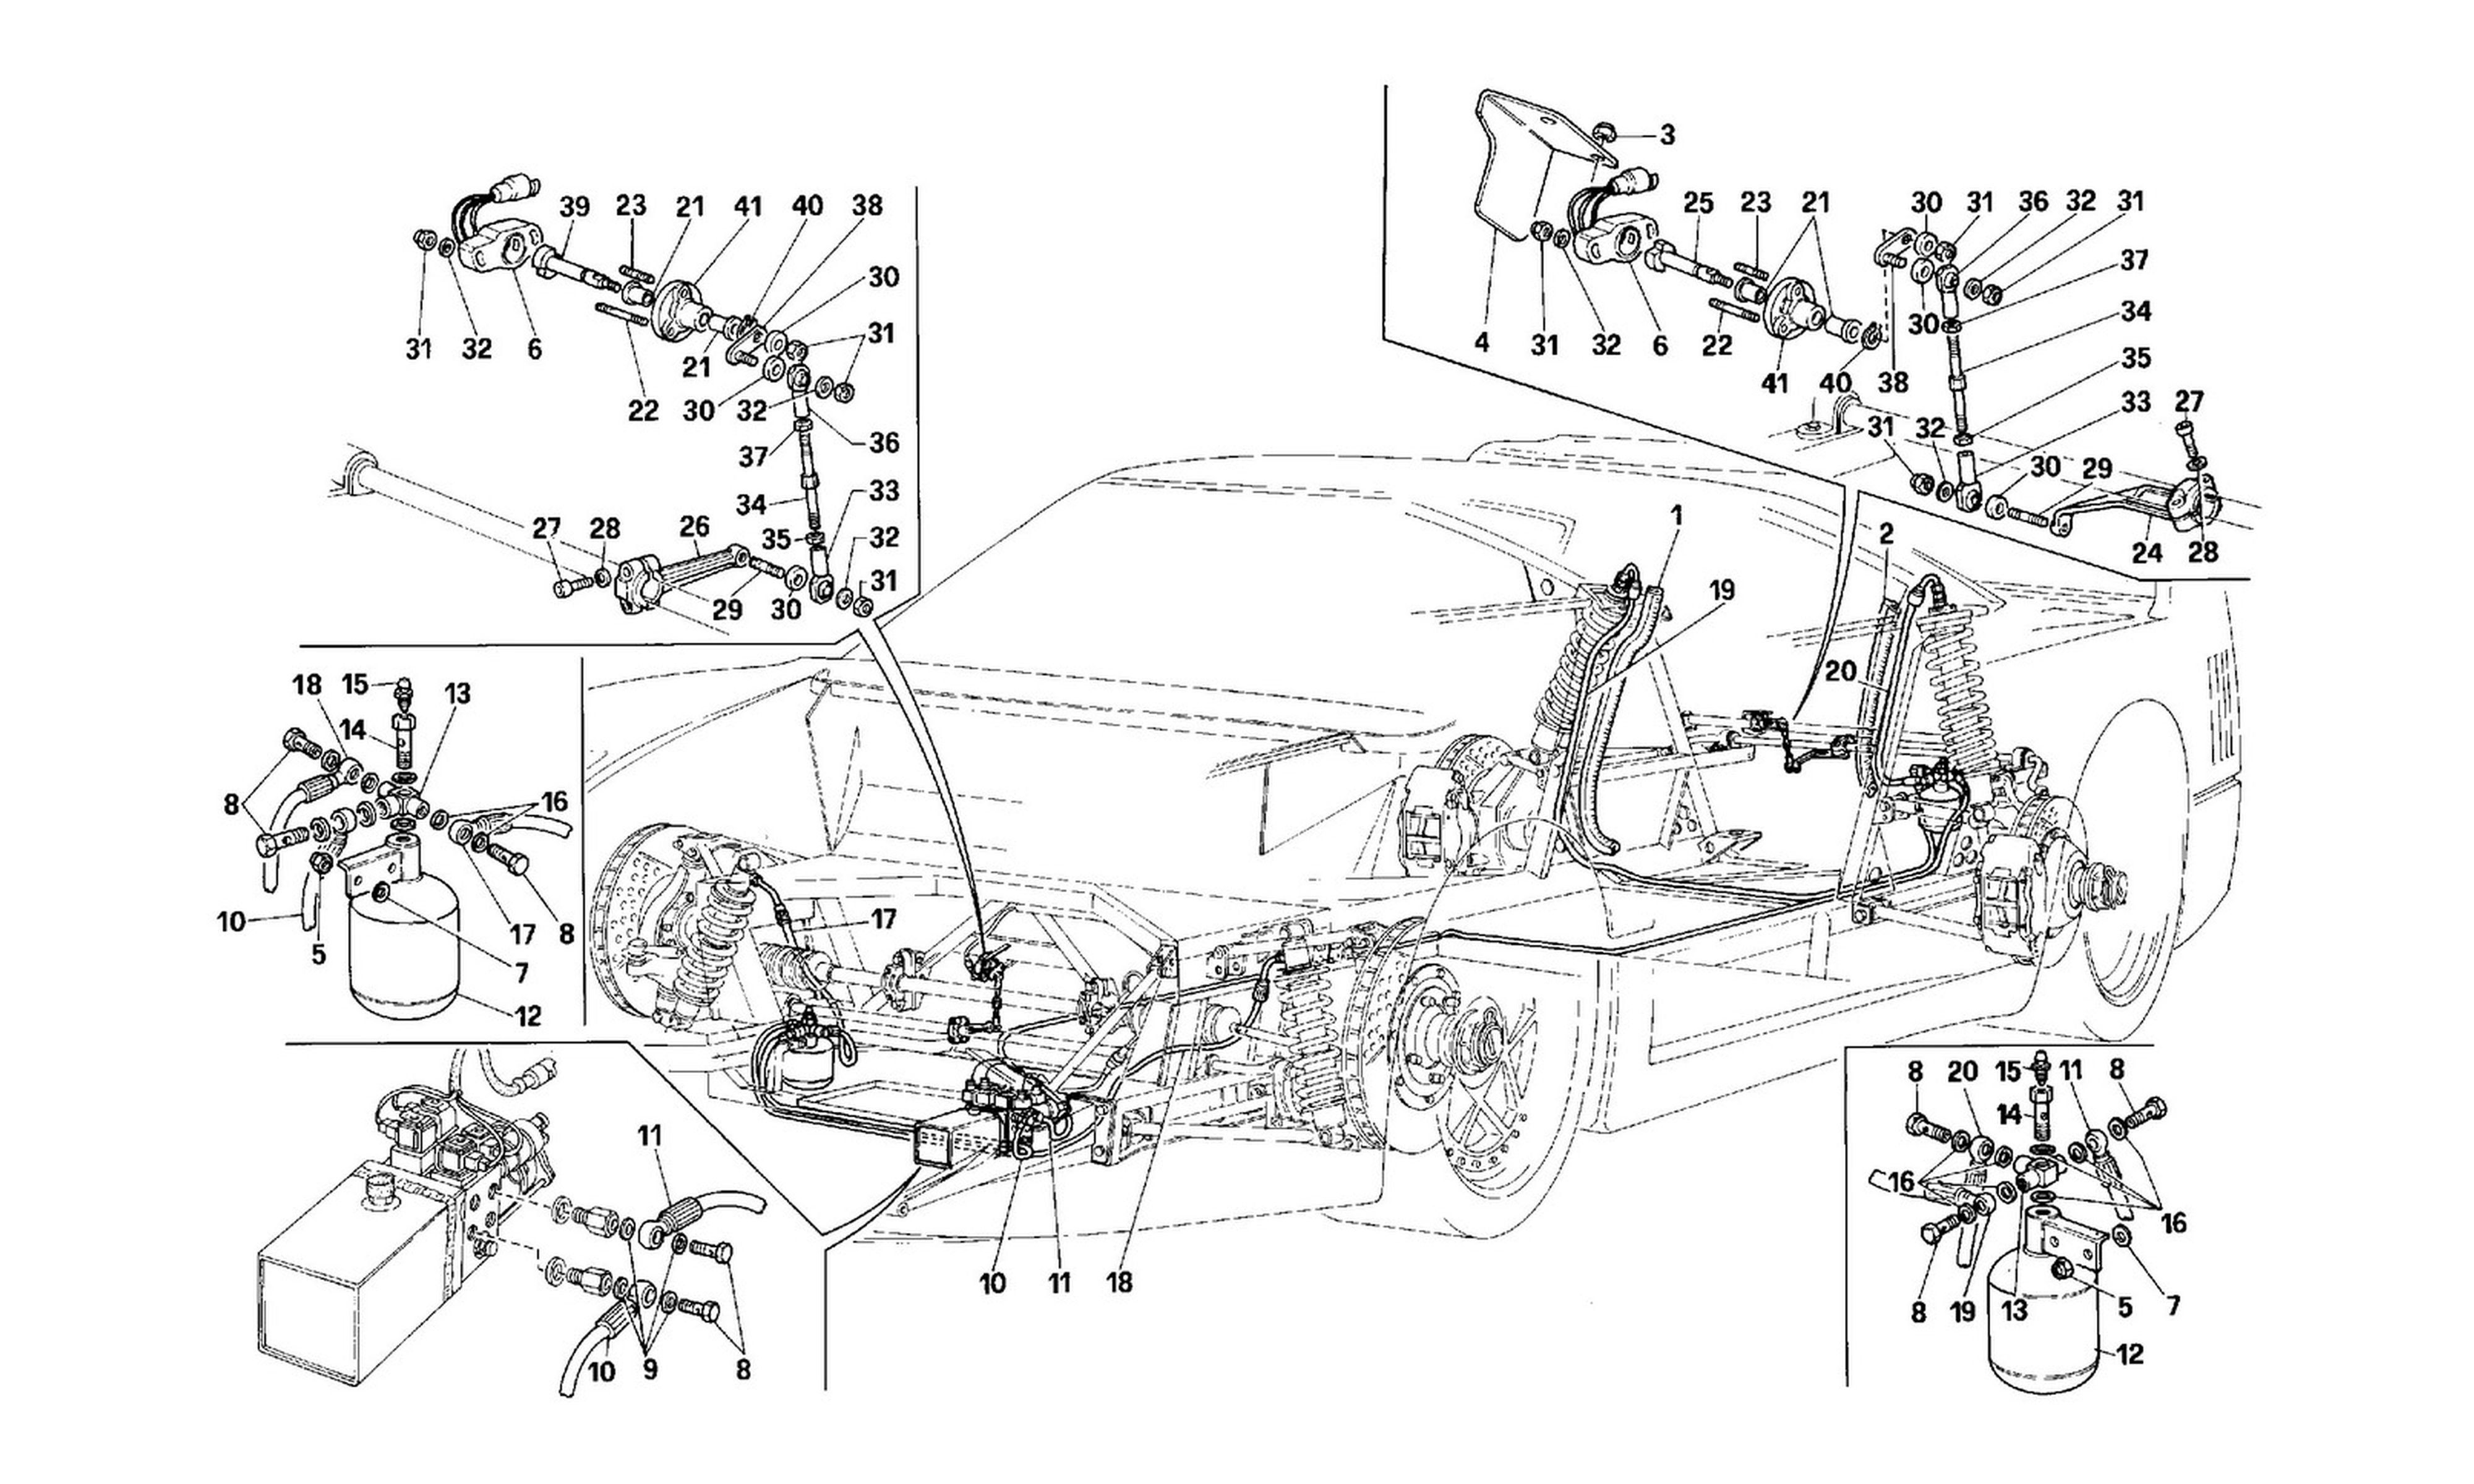 Schematic: Lifting Systems (For Equipped Cars)